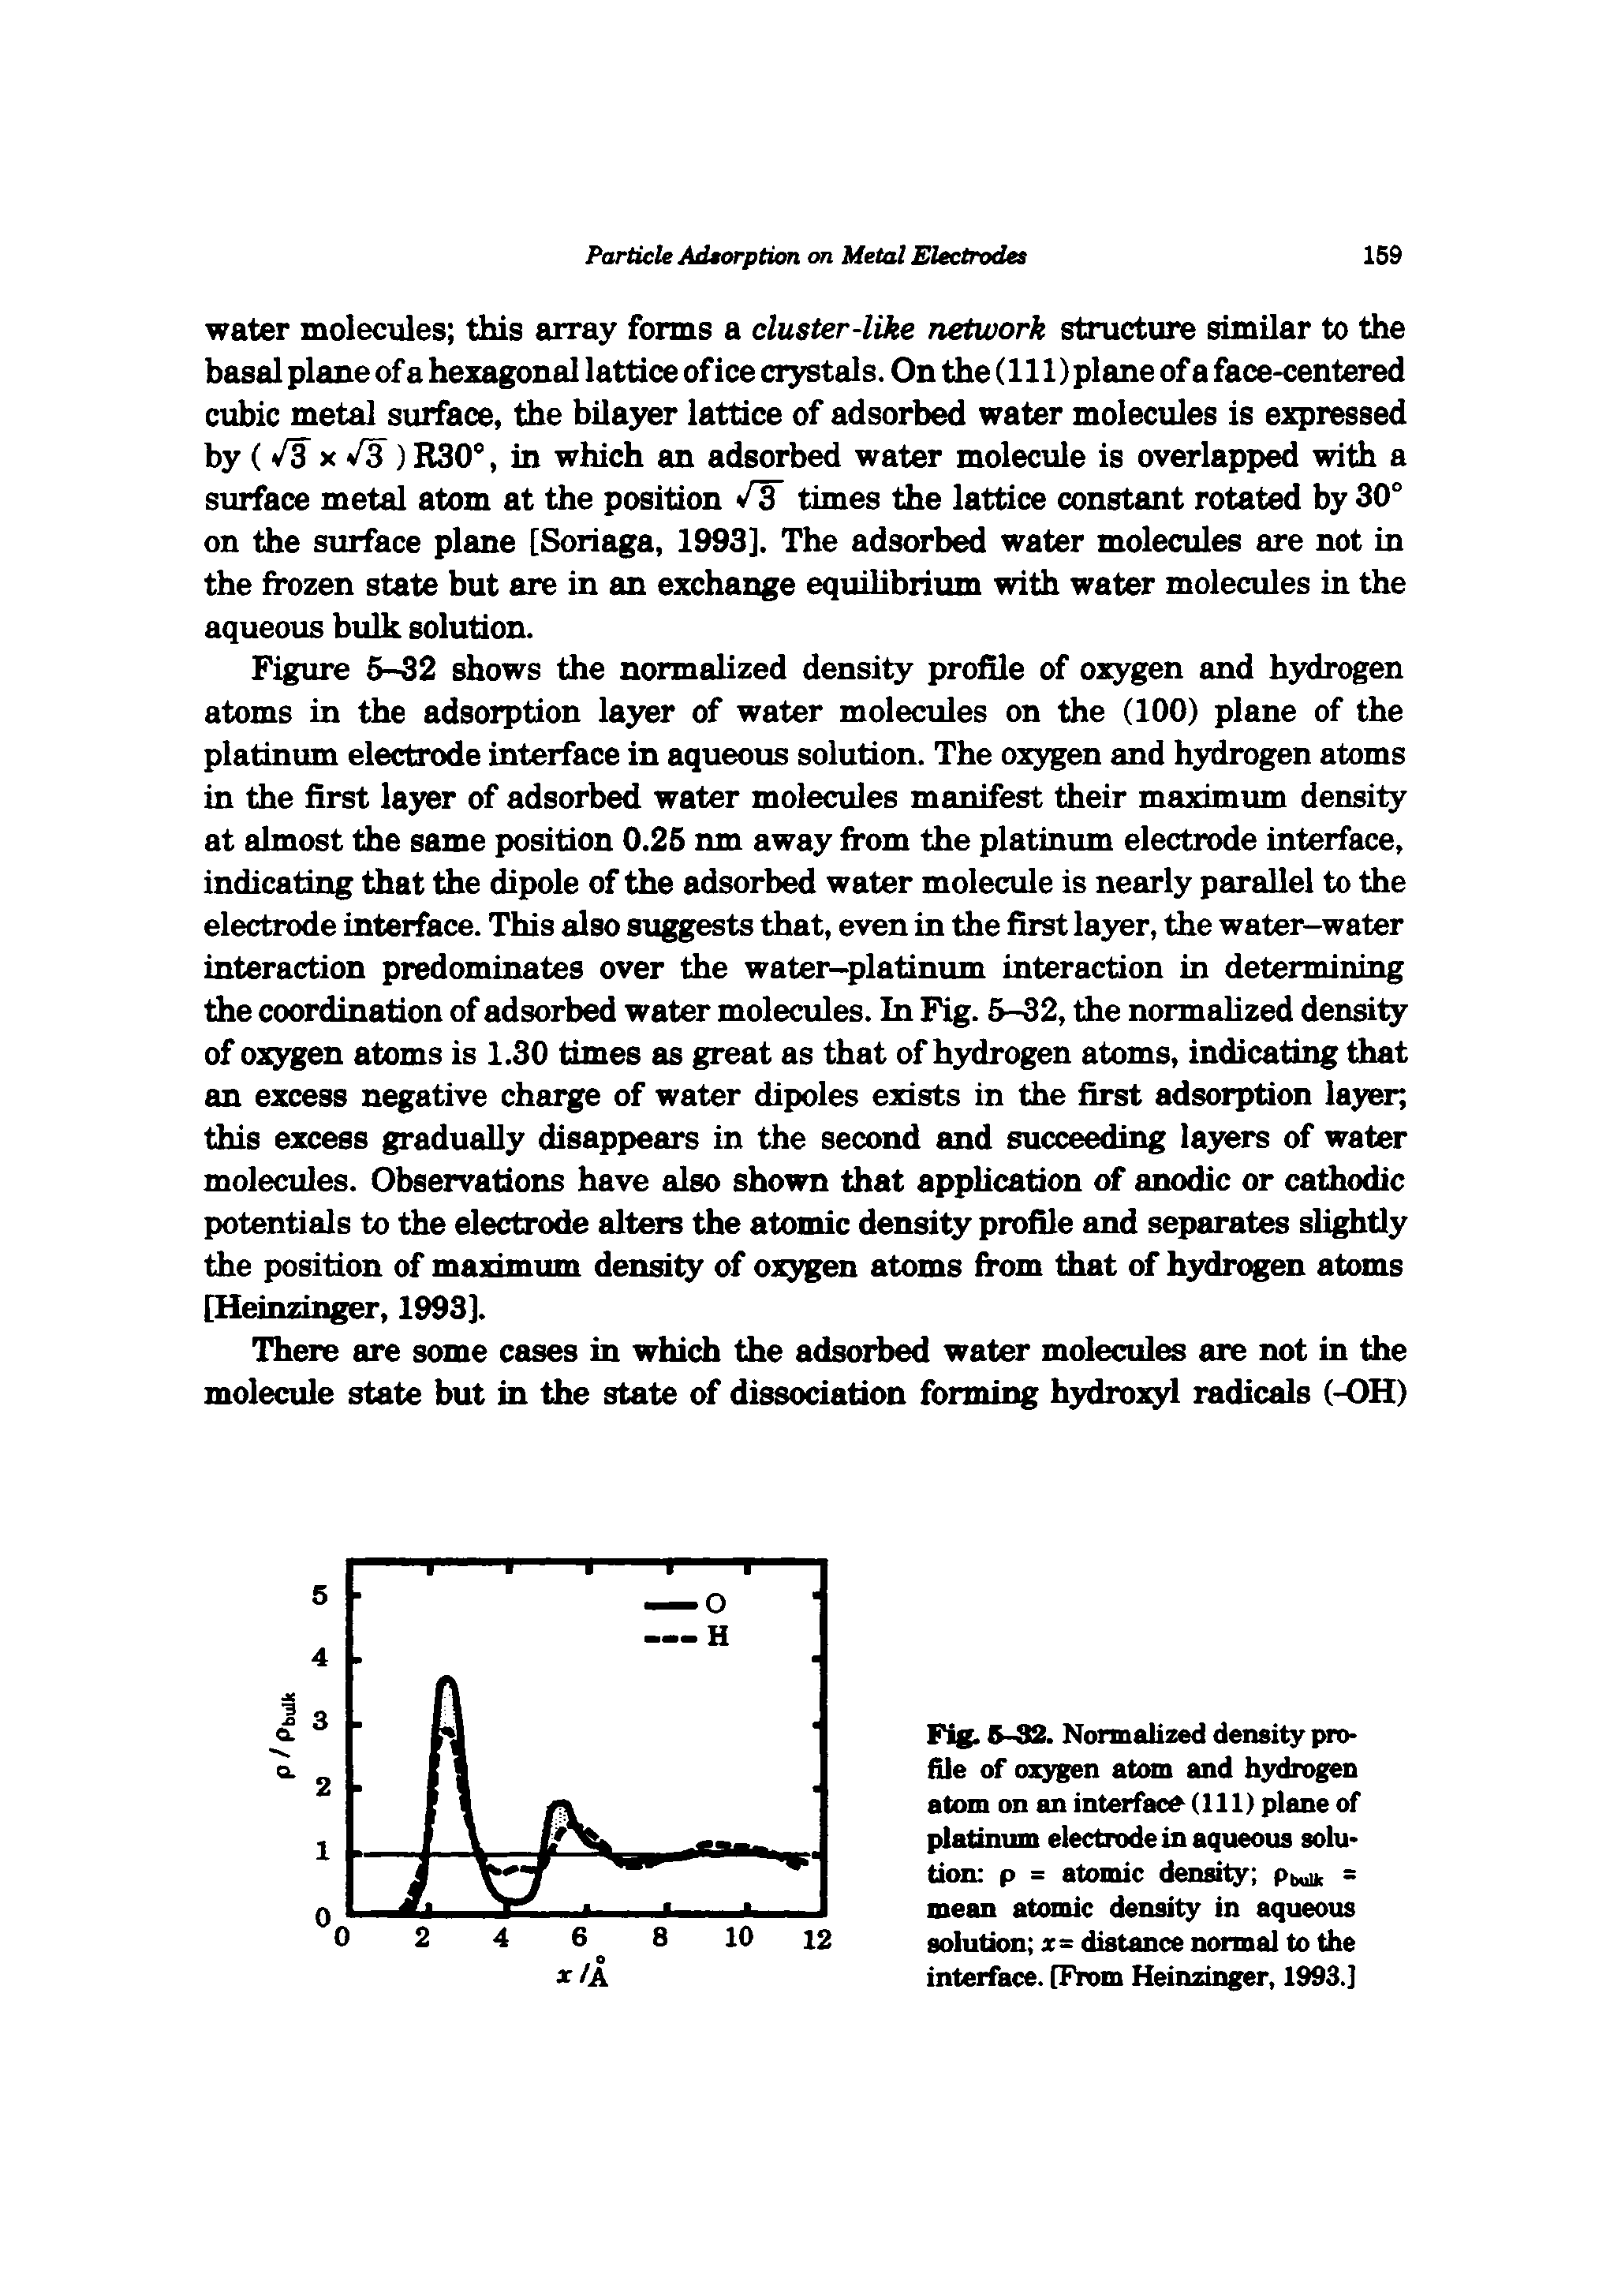 Fig. 5-32. Nonnalized density profile of oxygen atom and hydrogen atom on an interface (111) plane of platinum electrode in aqueous solution p = atomic density Pbuu, = mean atomic density in aqueous solution x= distance normal to the interface. [From Heinzinger, 1993.]...